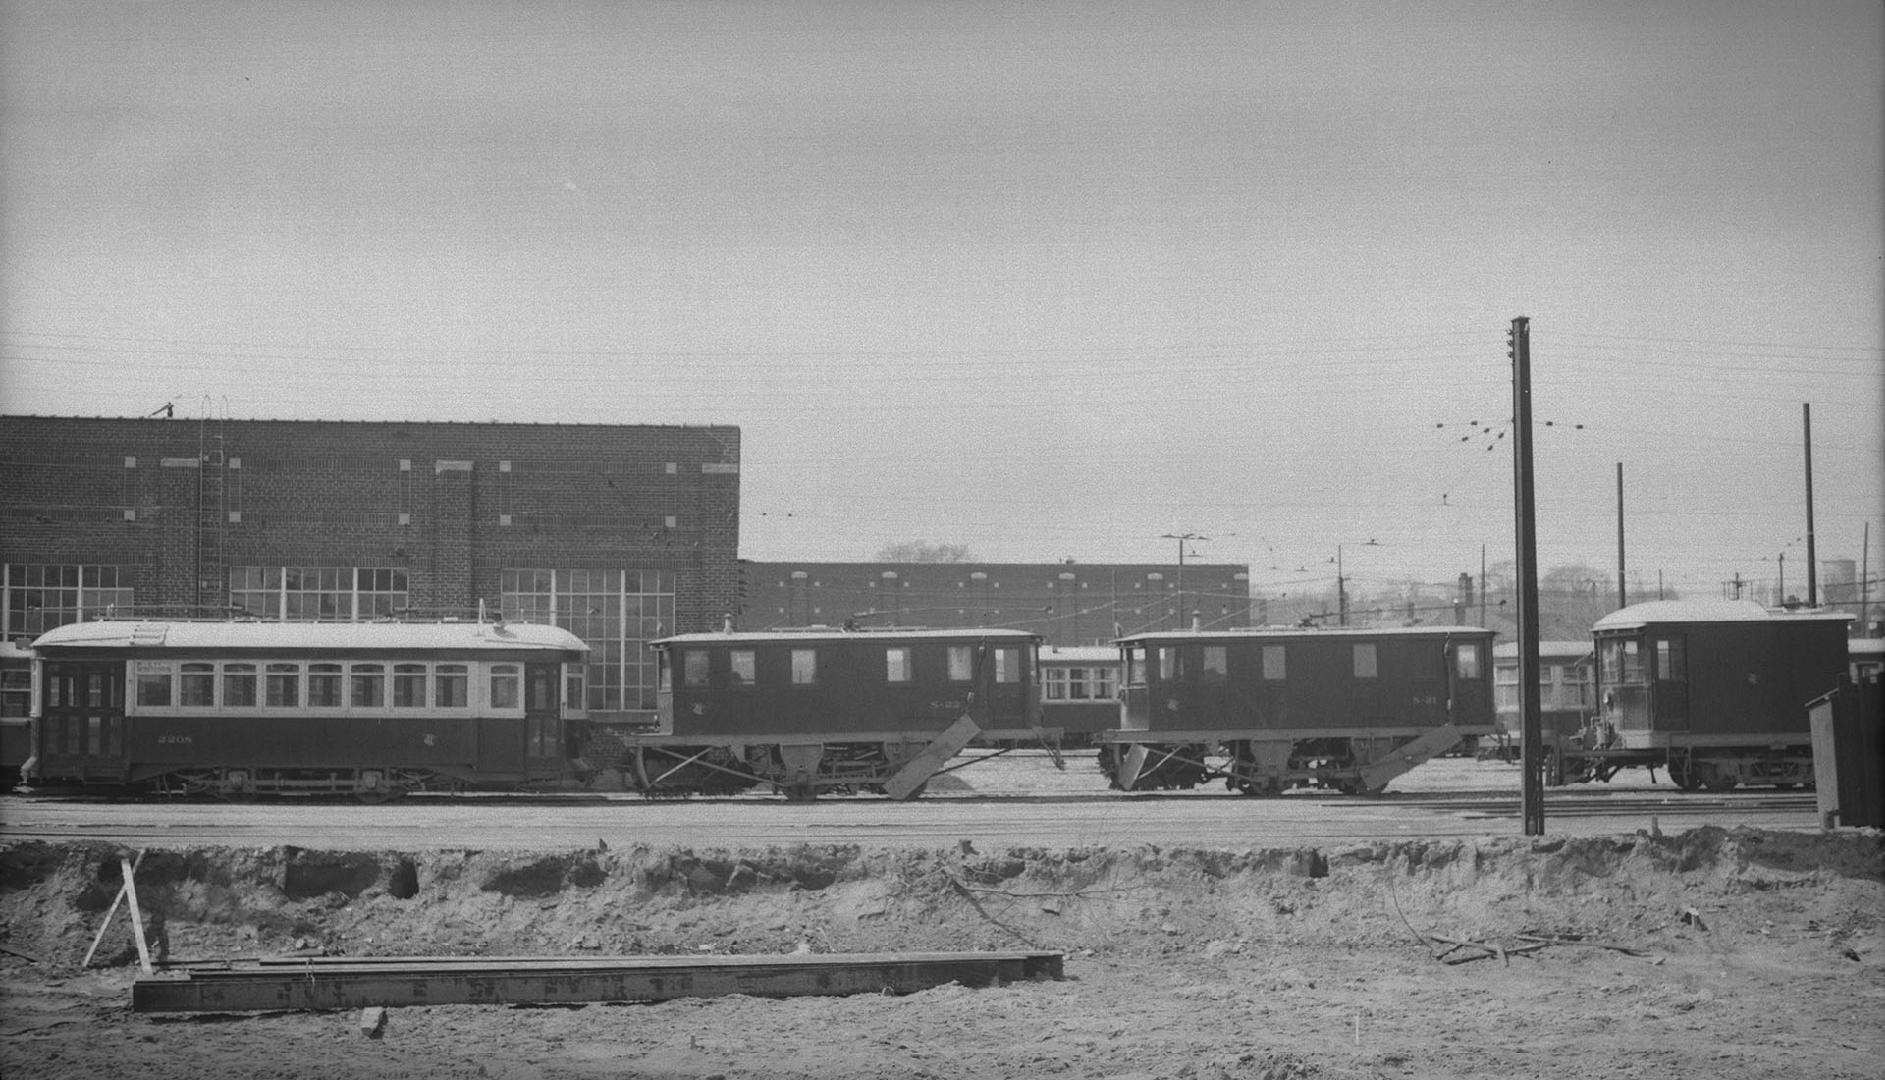 T.T.C., #2208, (scraper car, at left), at Eglinton carhouse, also showing sweepers S-22 (centre) & S-21 (right centre). Toronto, Ontario